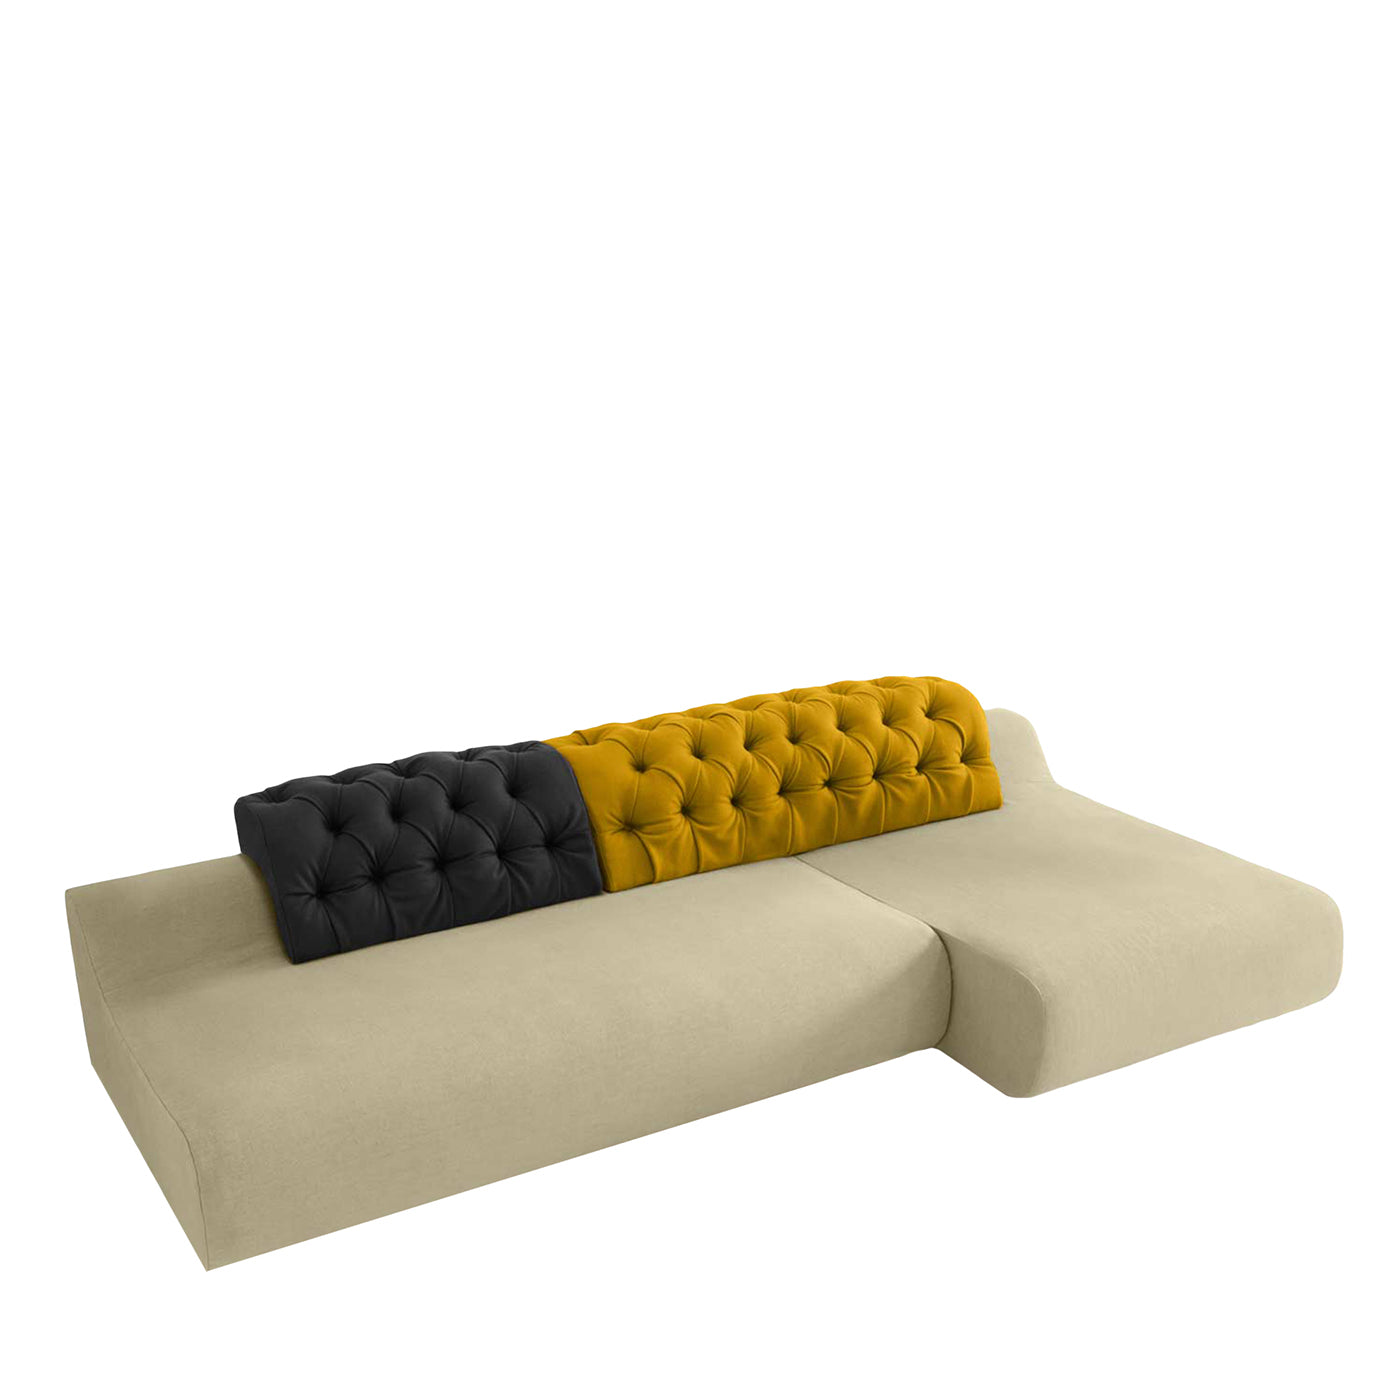 Baco Black and Yellow Chaise Sofa - Main view